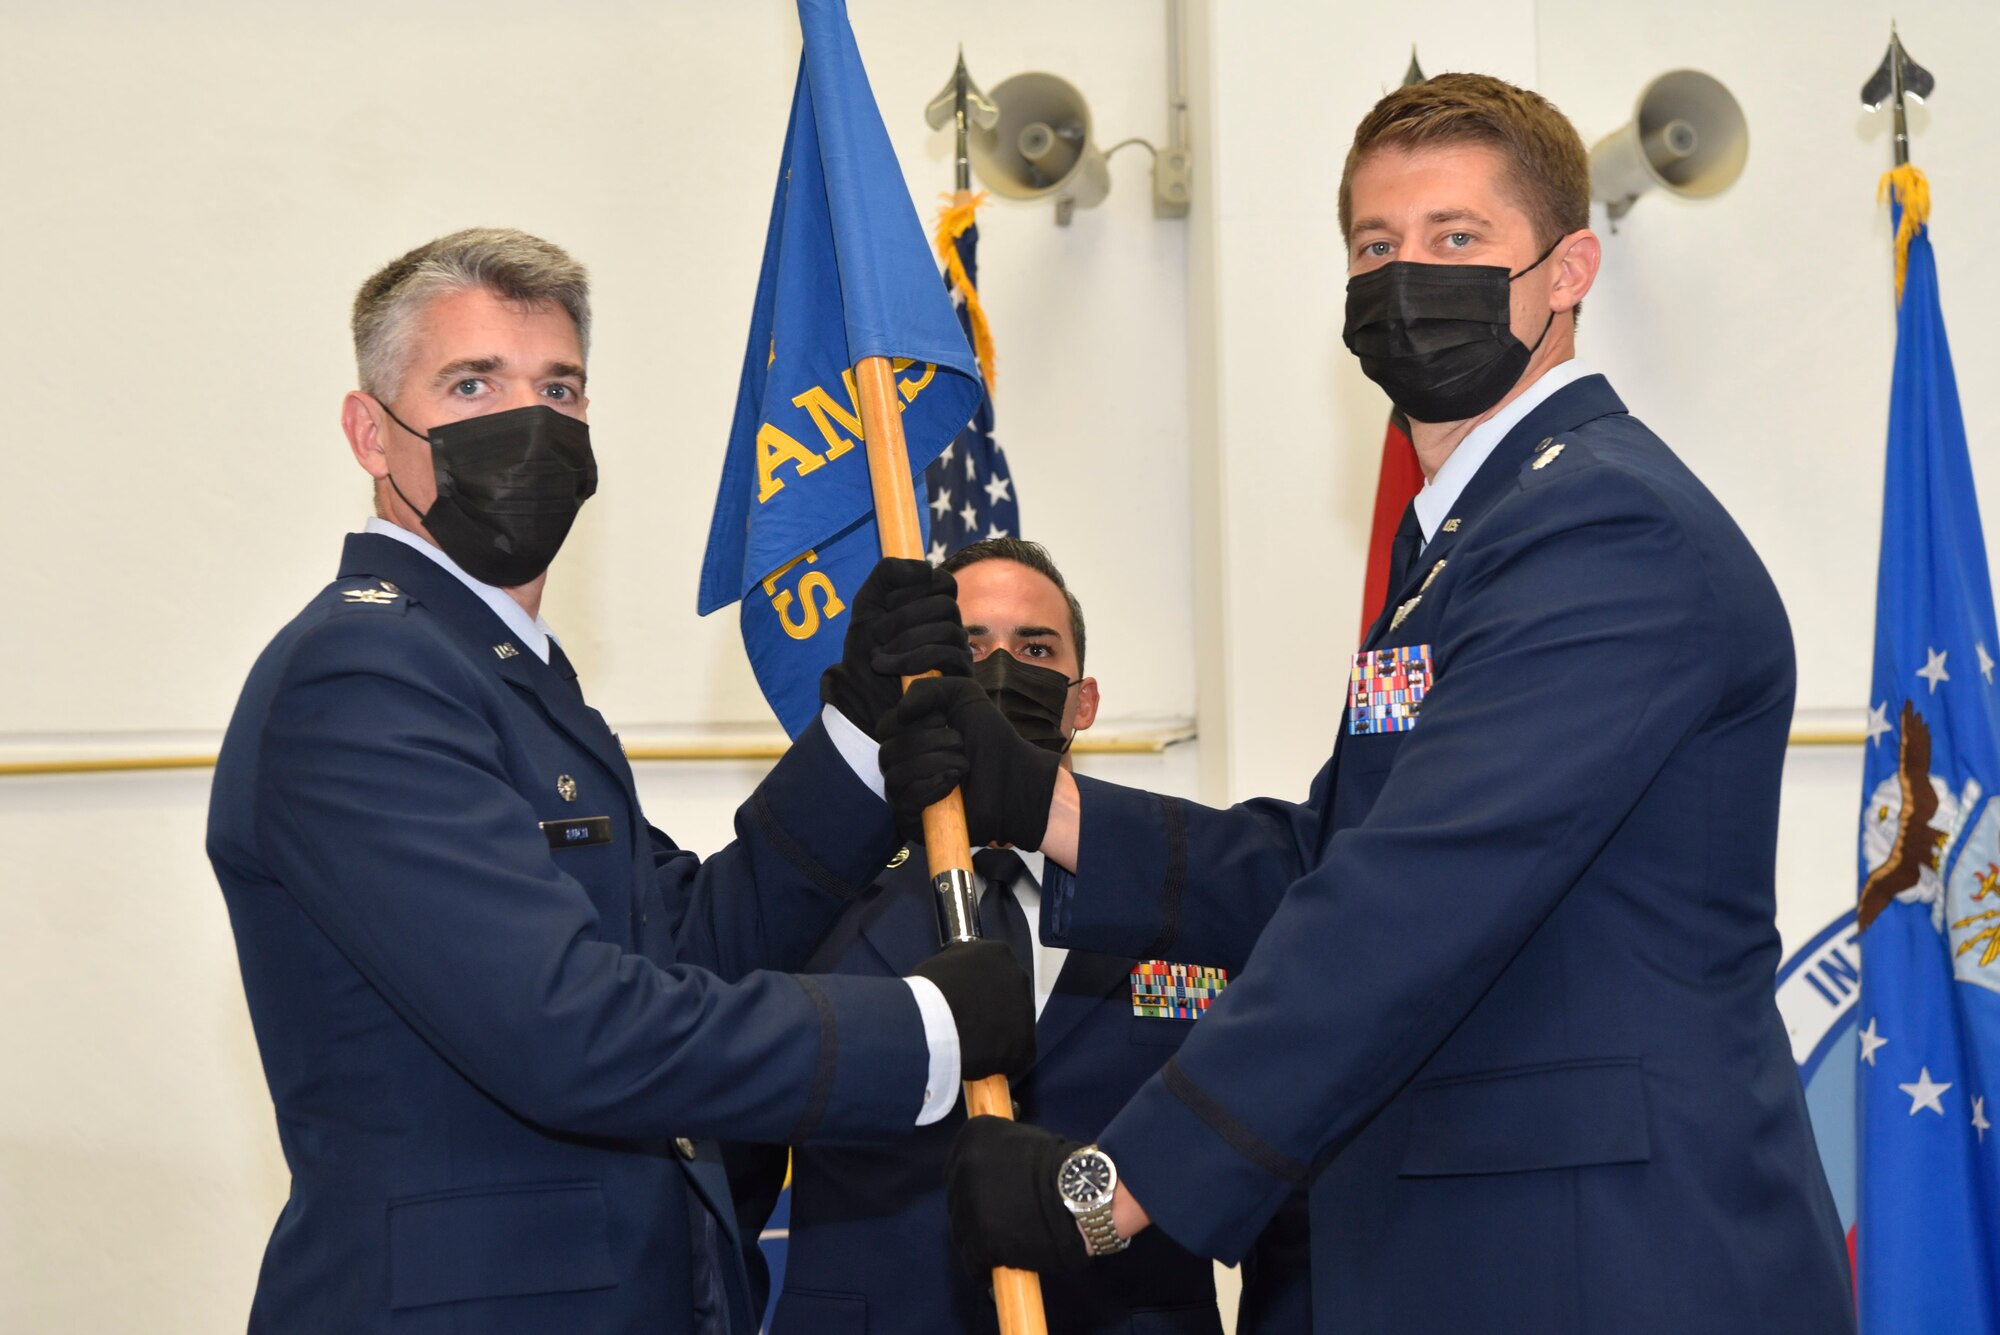 The 721st Air Mobility Operations Group commander gives the 726th Air Mobility Squadron guidon the new 726th AMS commander.